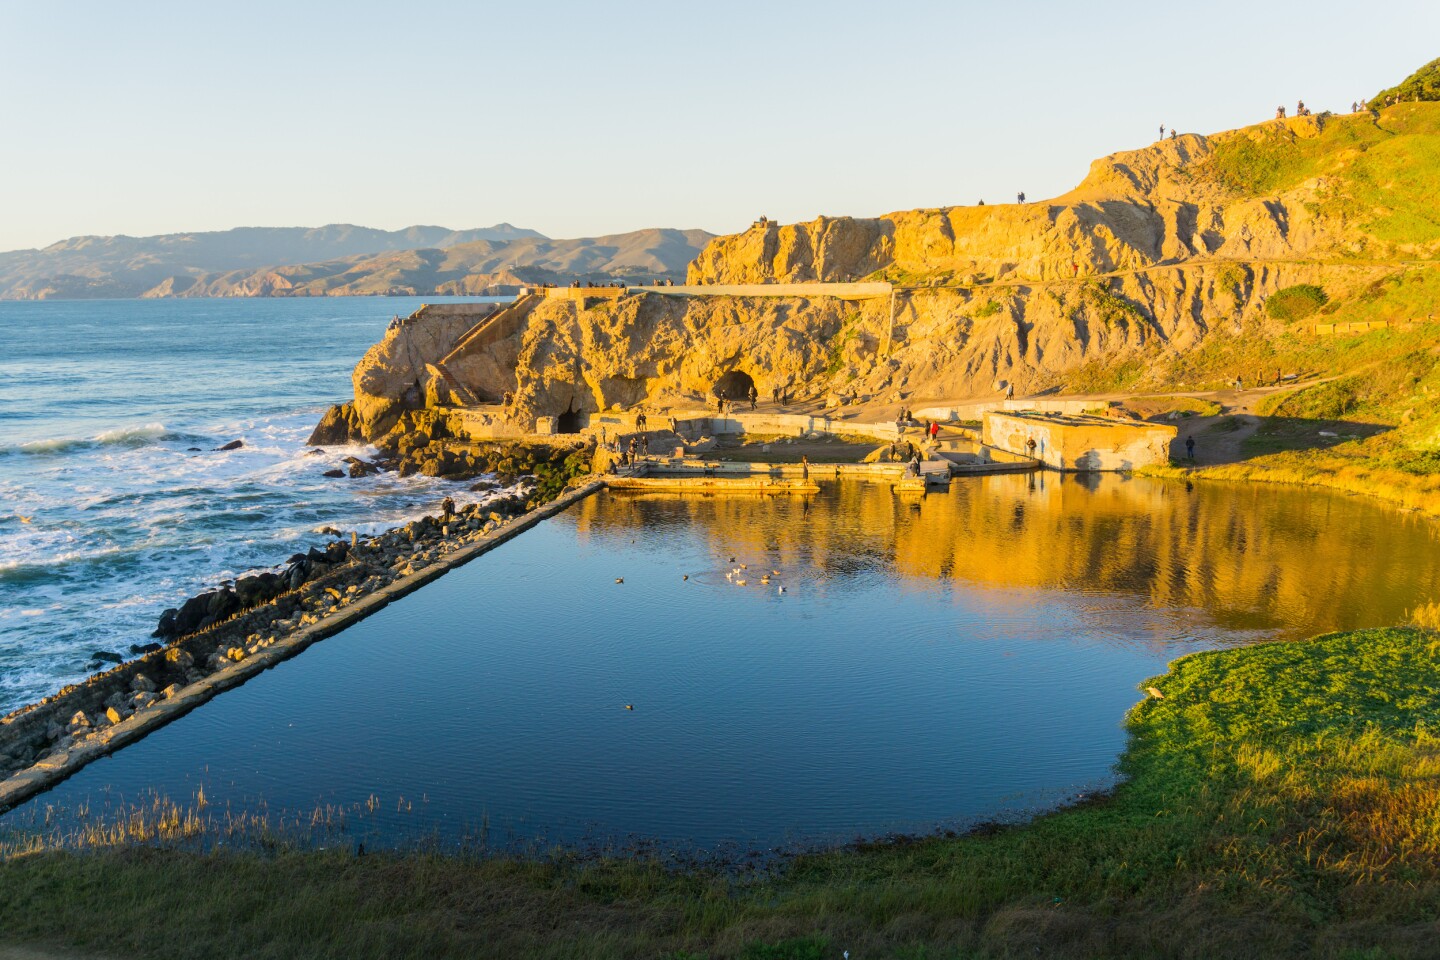 <a>The ruins of an old bathhouse, Sutro Baths, rest at the end of the Land's End trail by Ocean Beach.</a>